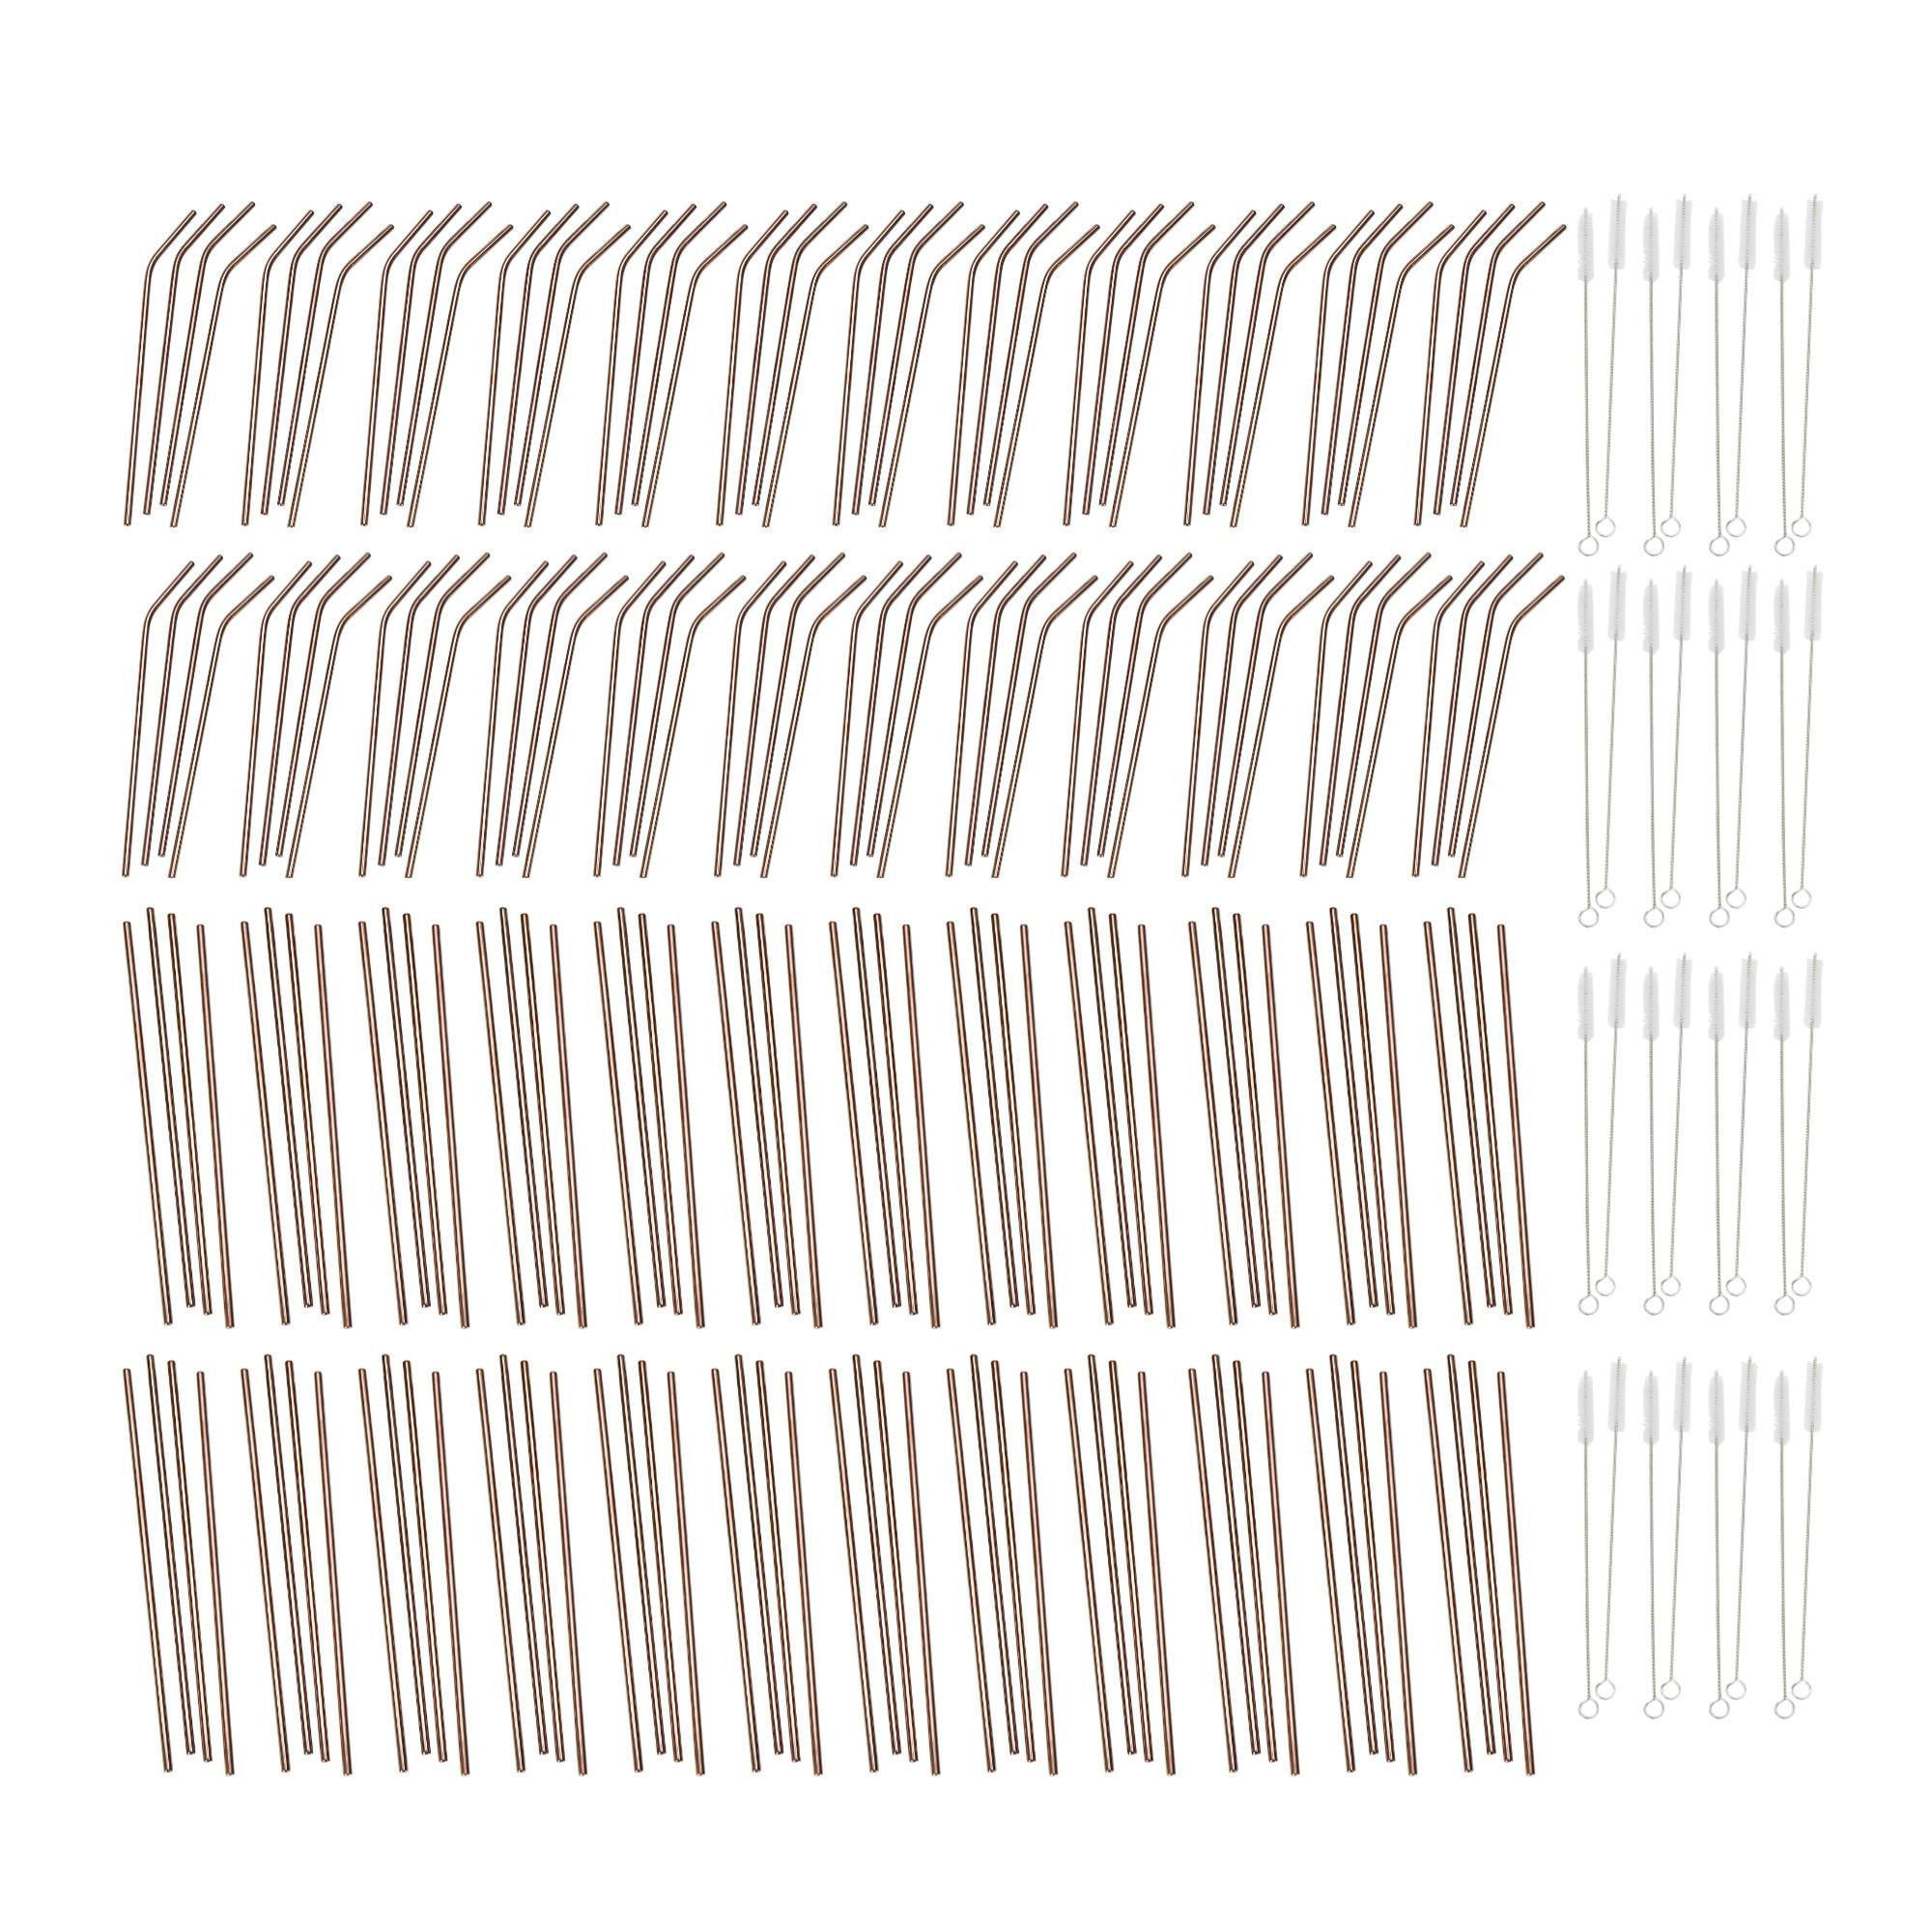 Rose Gold Reusable Metal Drinking Straws Stainless Steel Straw Bent Straight lot 